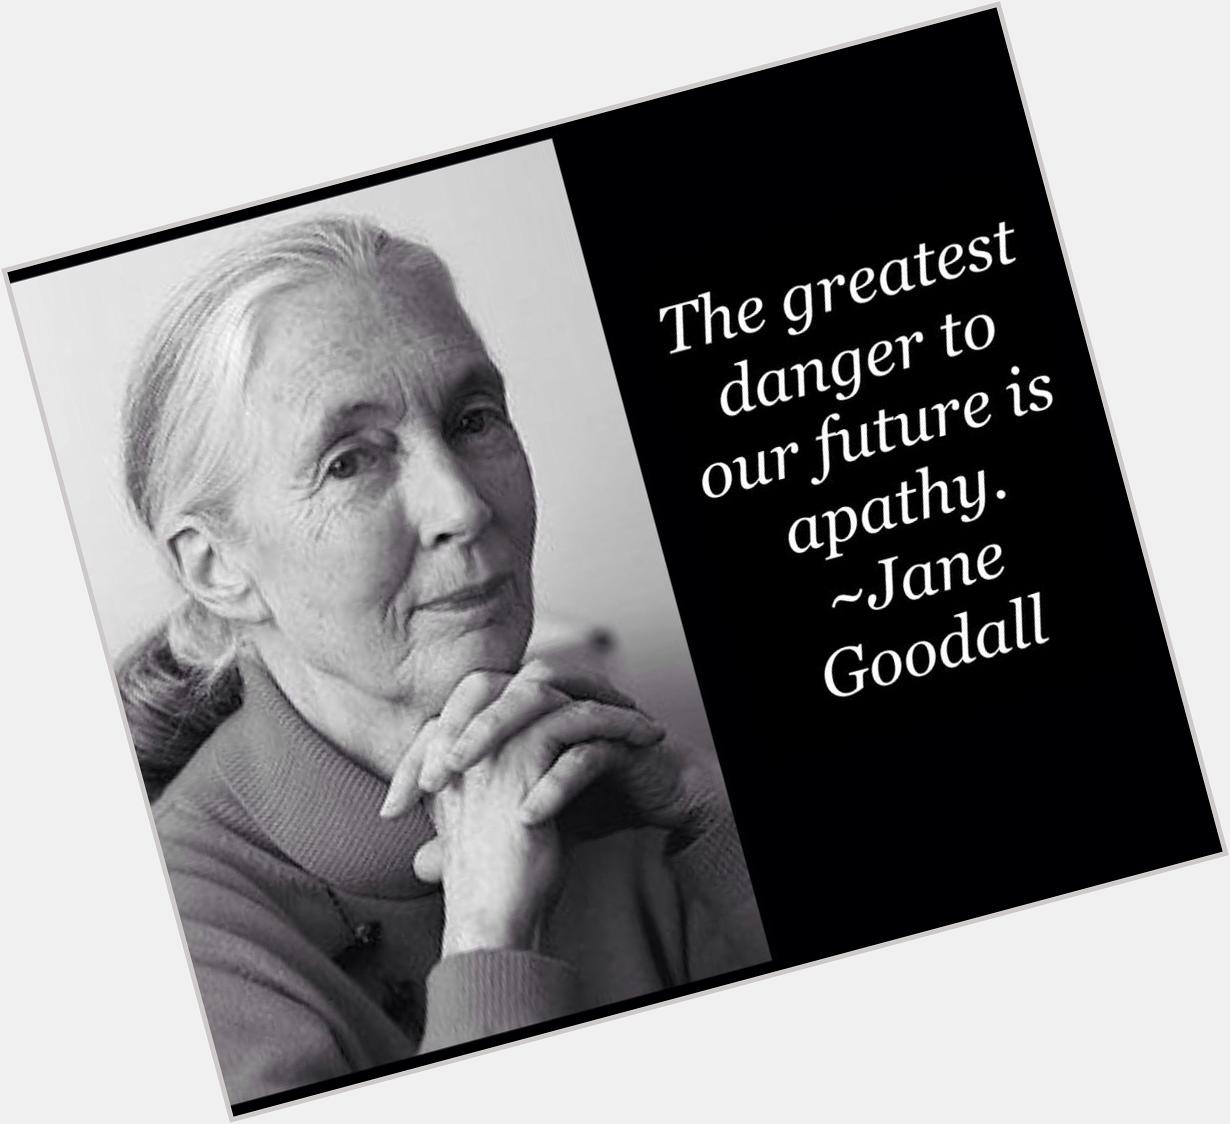 Happy Birthday to Jane Goodall!

A wonderful wise woman inspiring generations to care. 